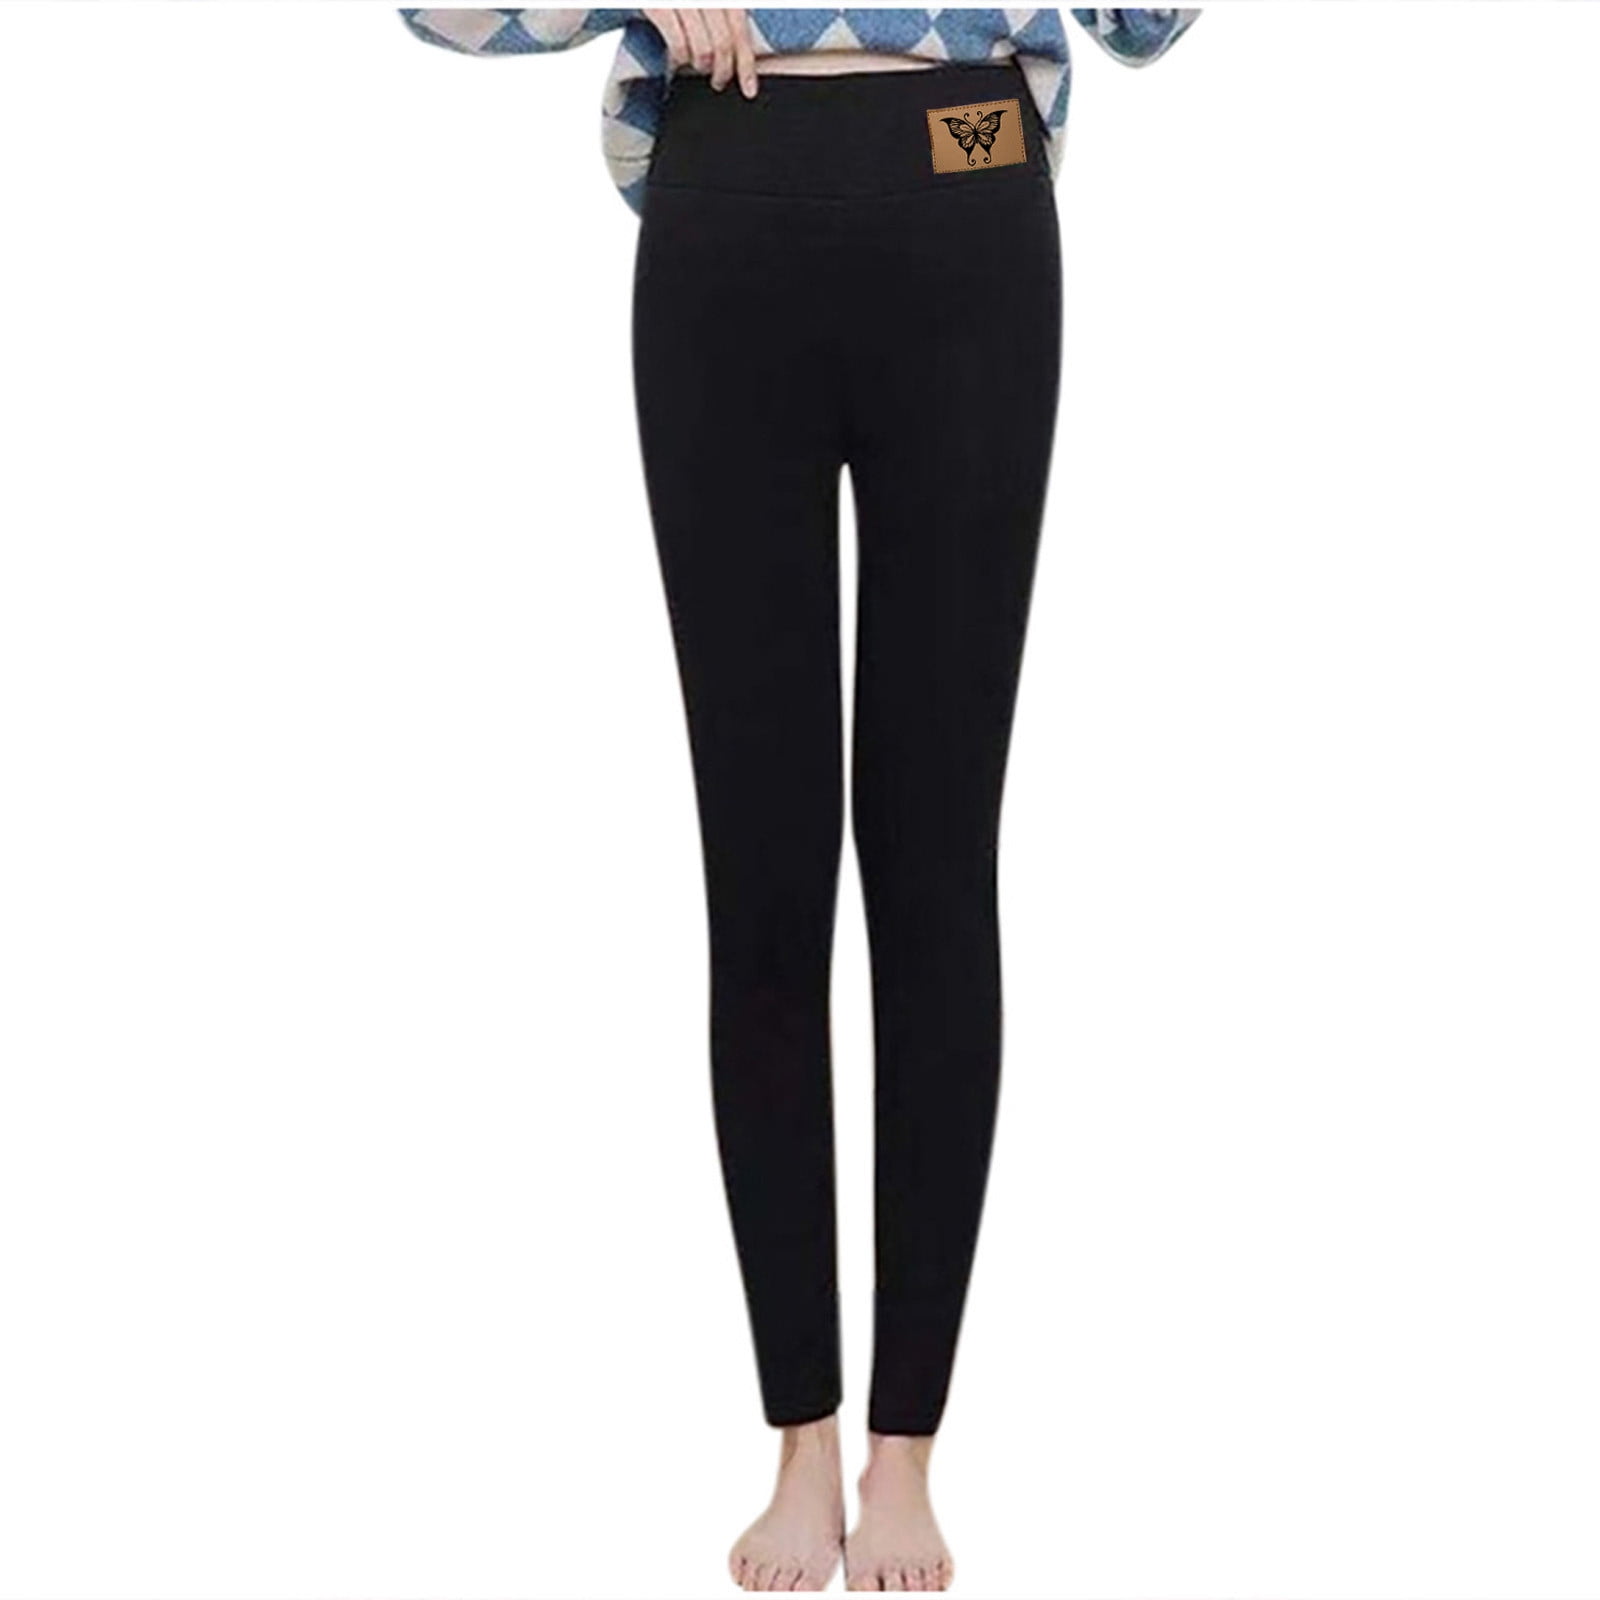  Cold Weather Hiking Pants Women